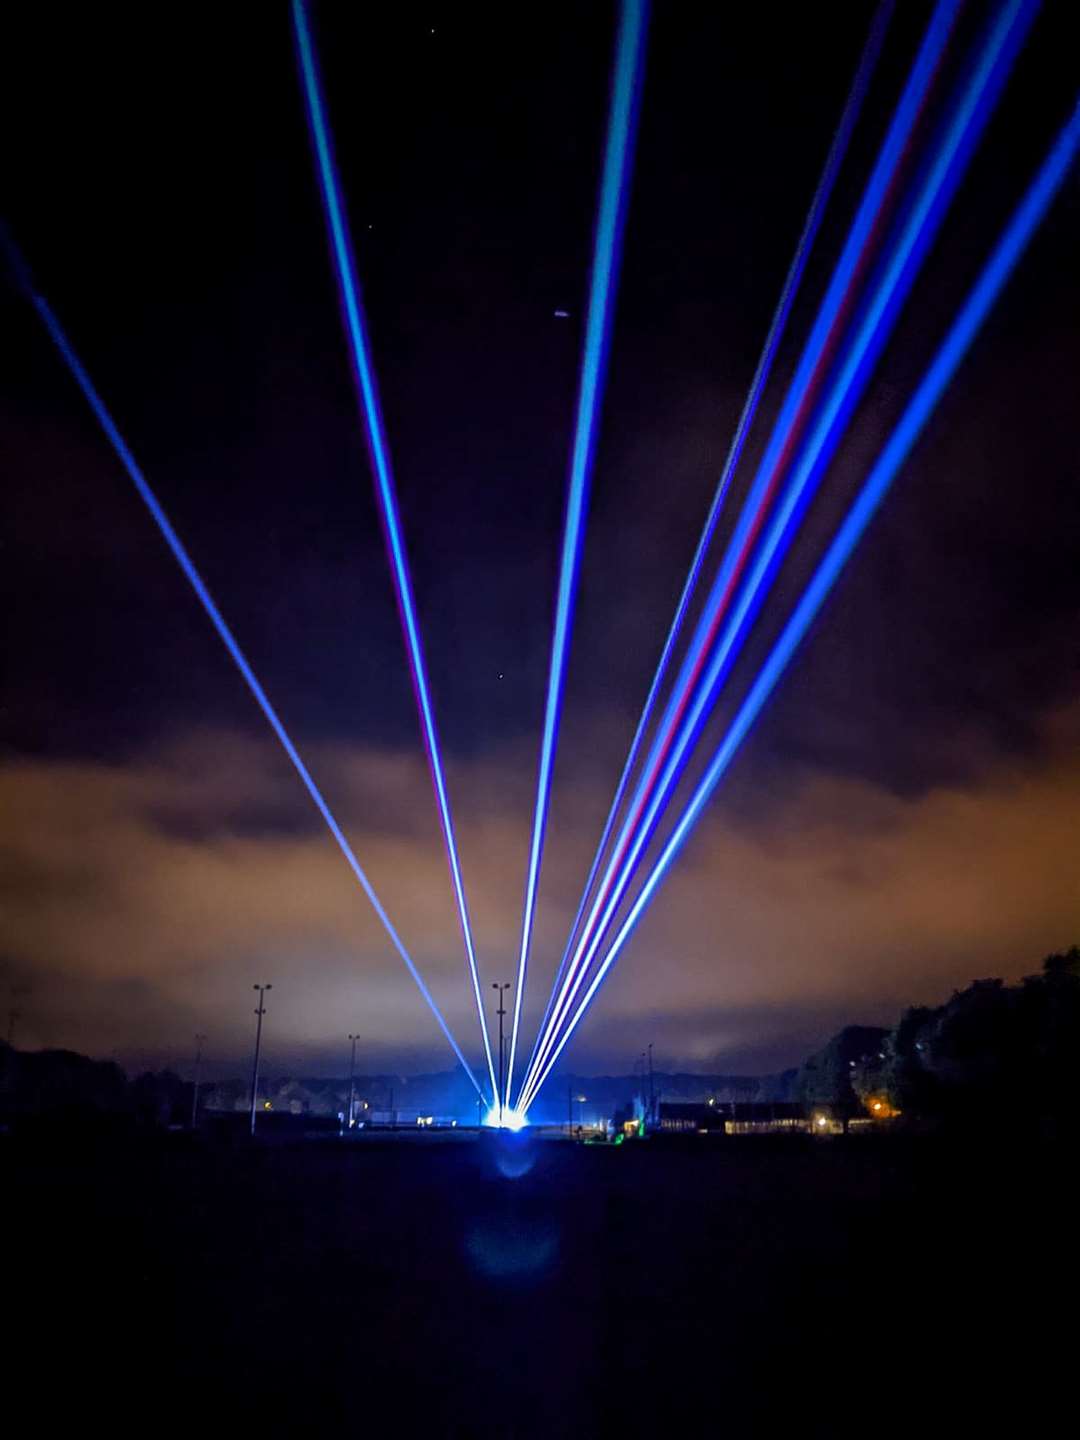 The lasers were shone into the night sky over Medway